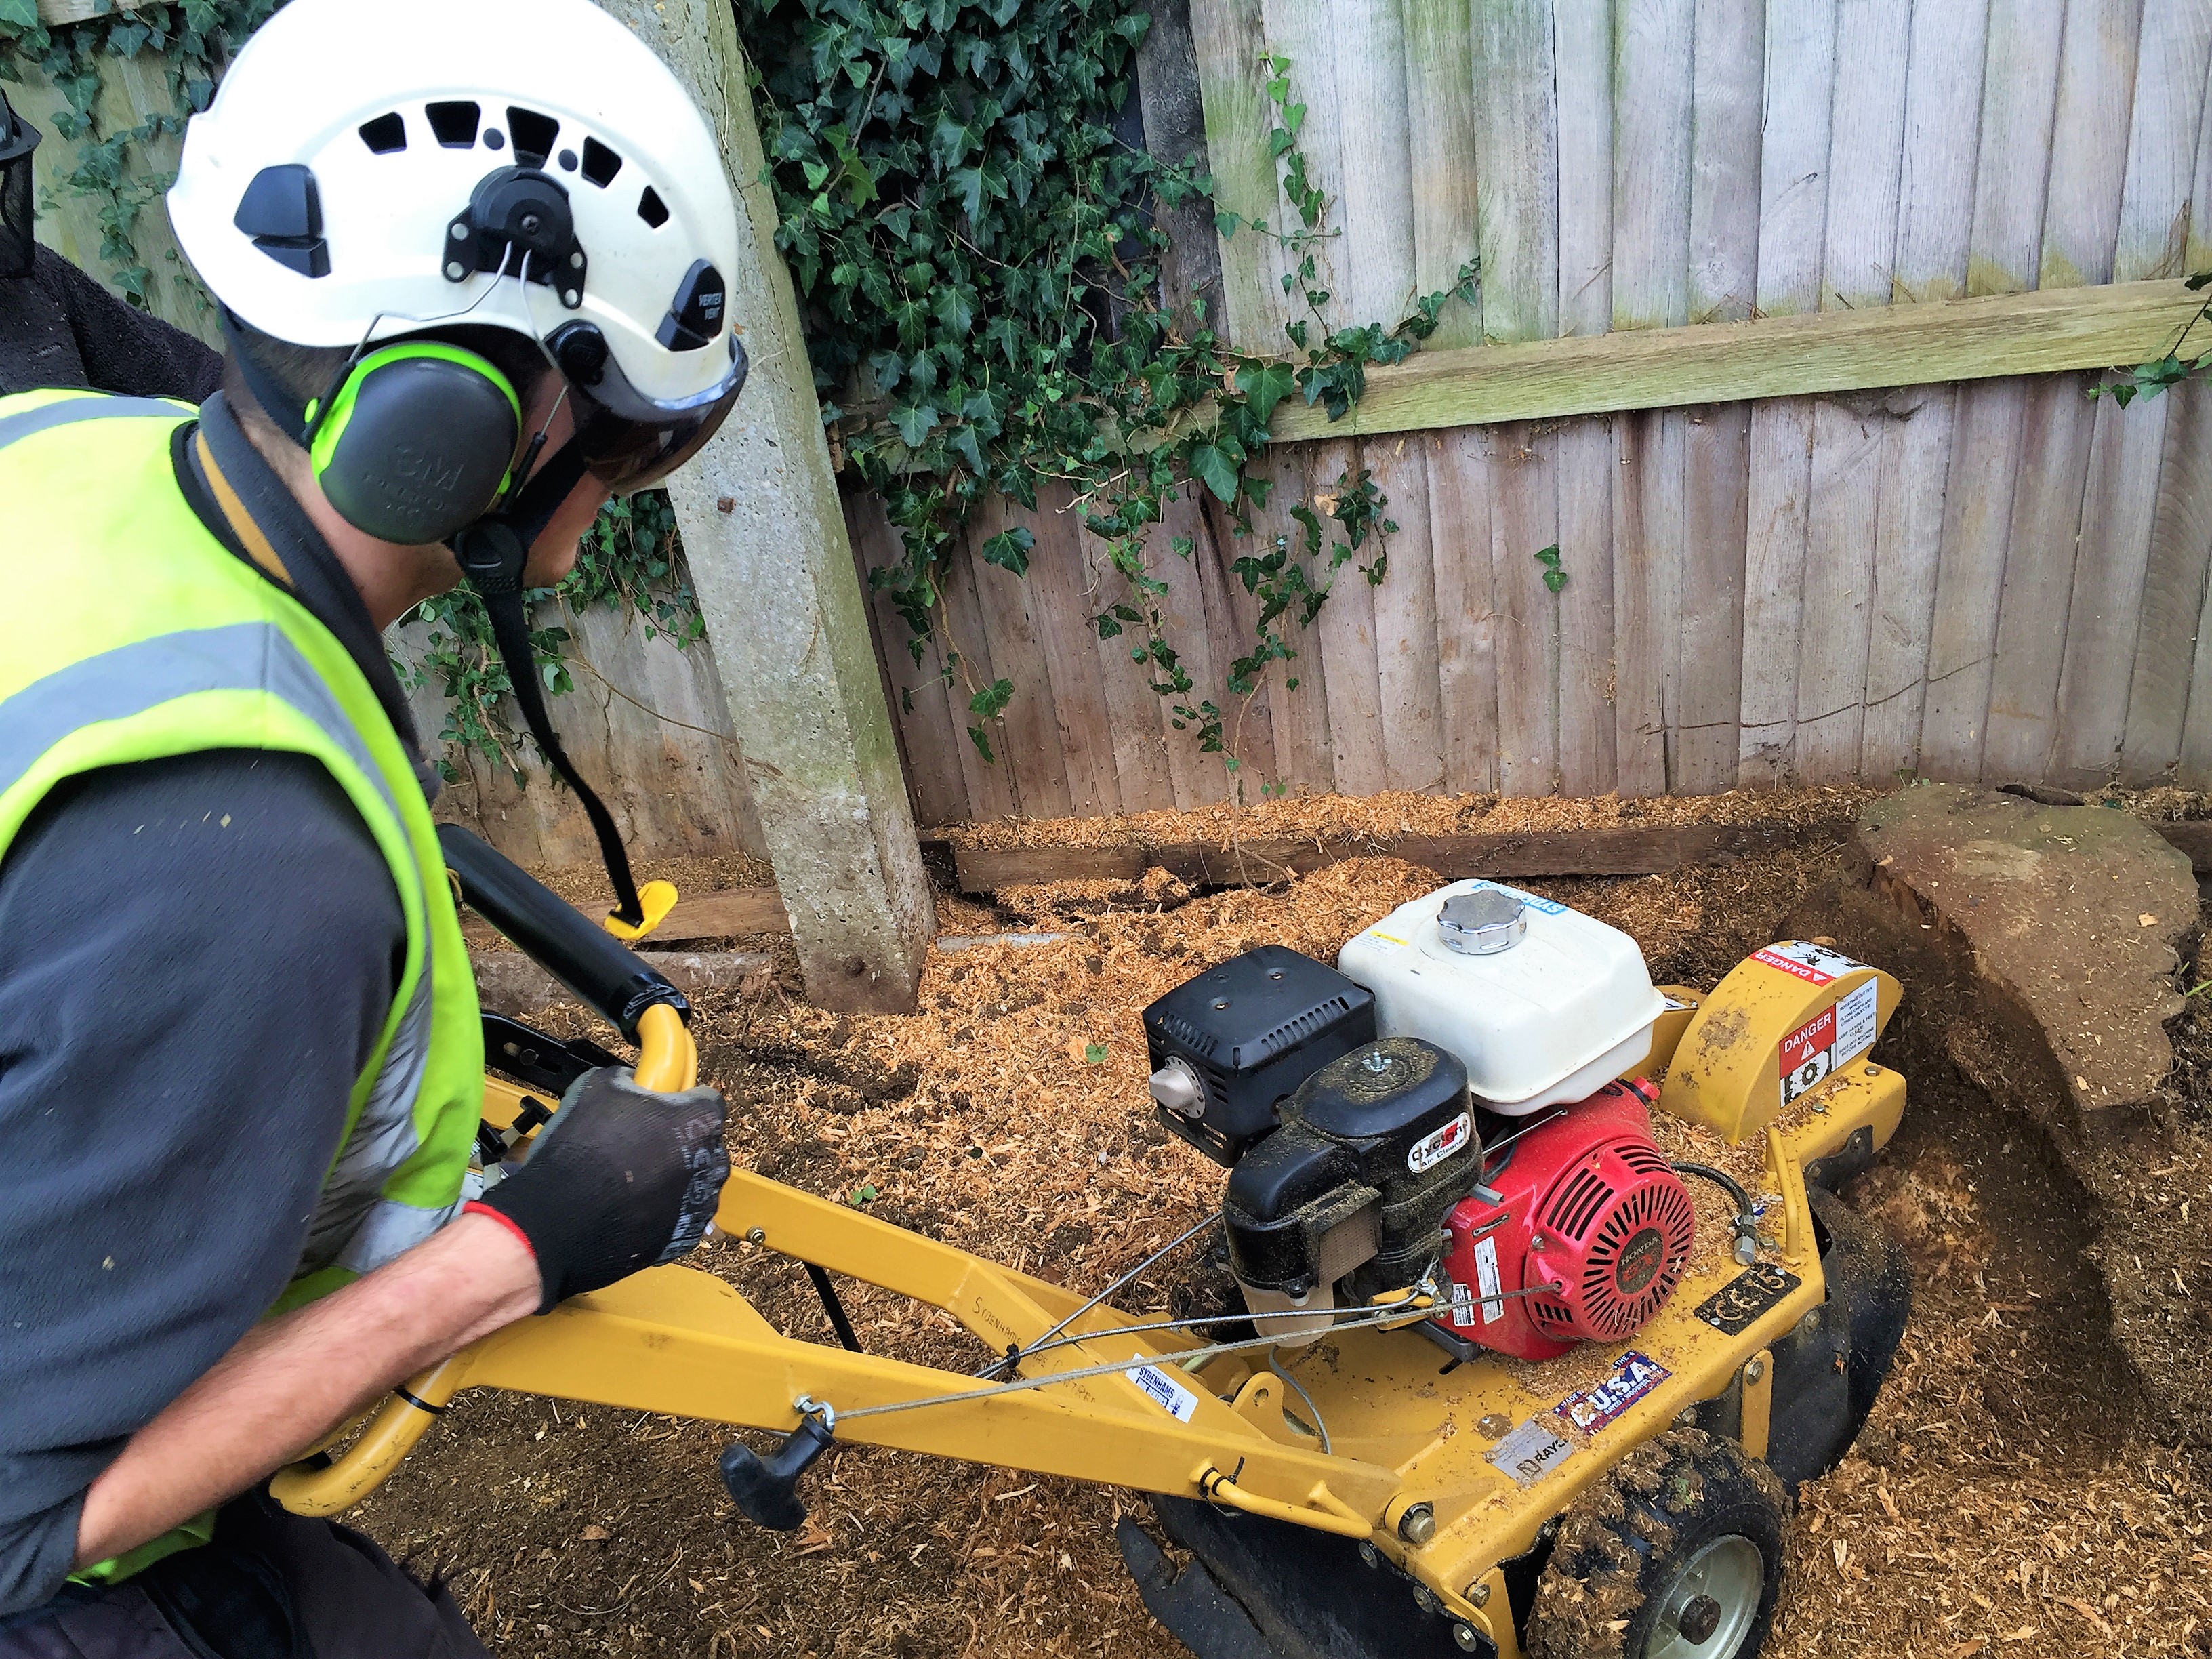 Dorset Treeworx Ltd | Tree and hedge stump grinding removal service to remove those unwanted tree stumps by stump grinding - tree removal, tree felling, tree cut down, tree felling services